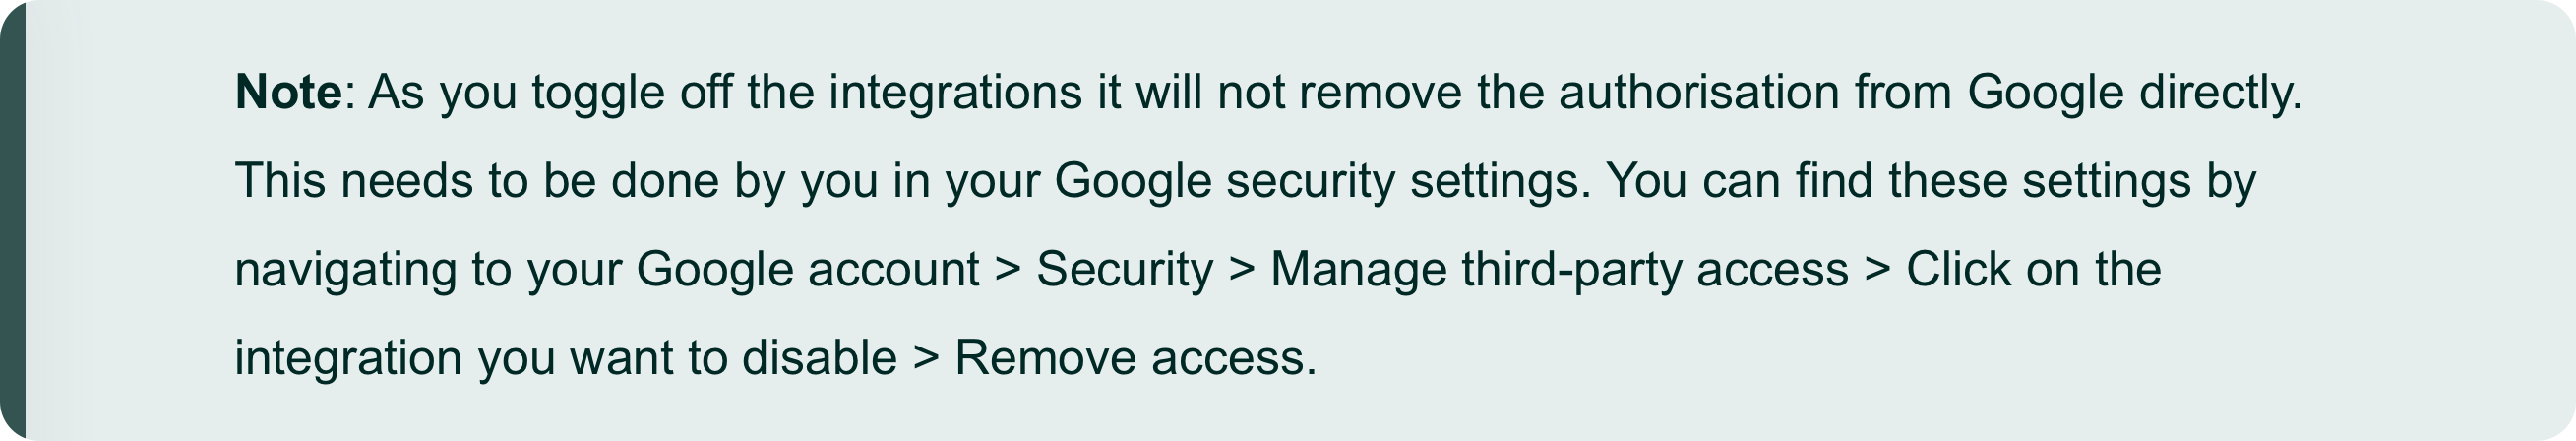 Google_Access_Permissions_and_Authorising_the_Google_Drive_and_Calendar_Integrations_1.png